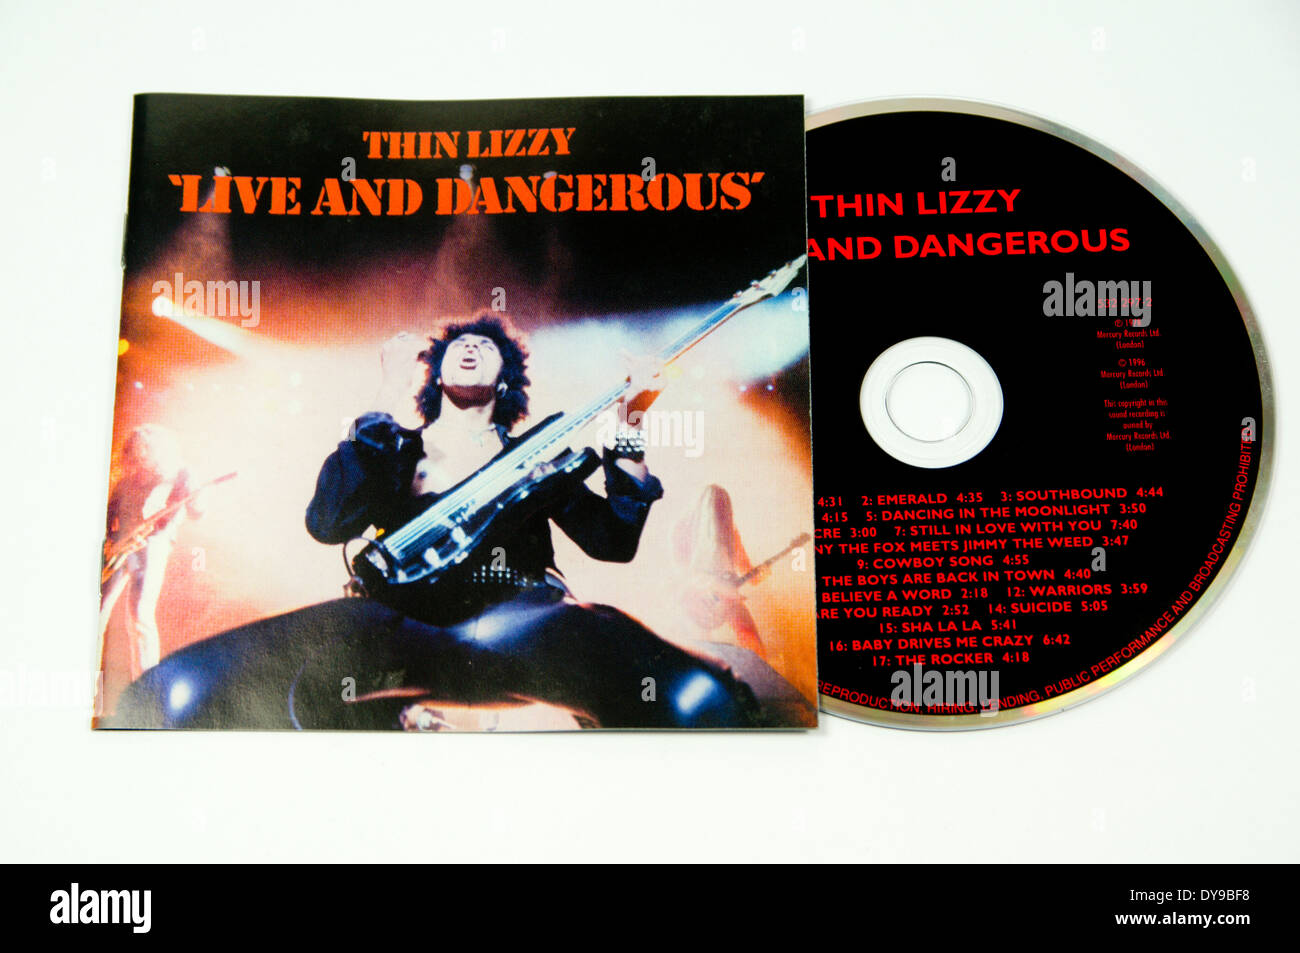 Thin Lizzy LIve and Dangerous Album. Stock Photo